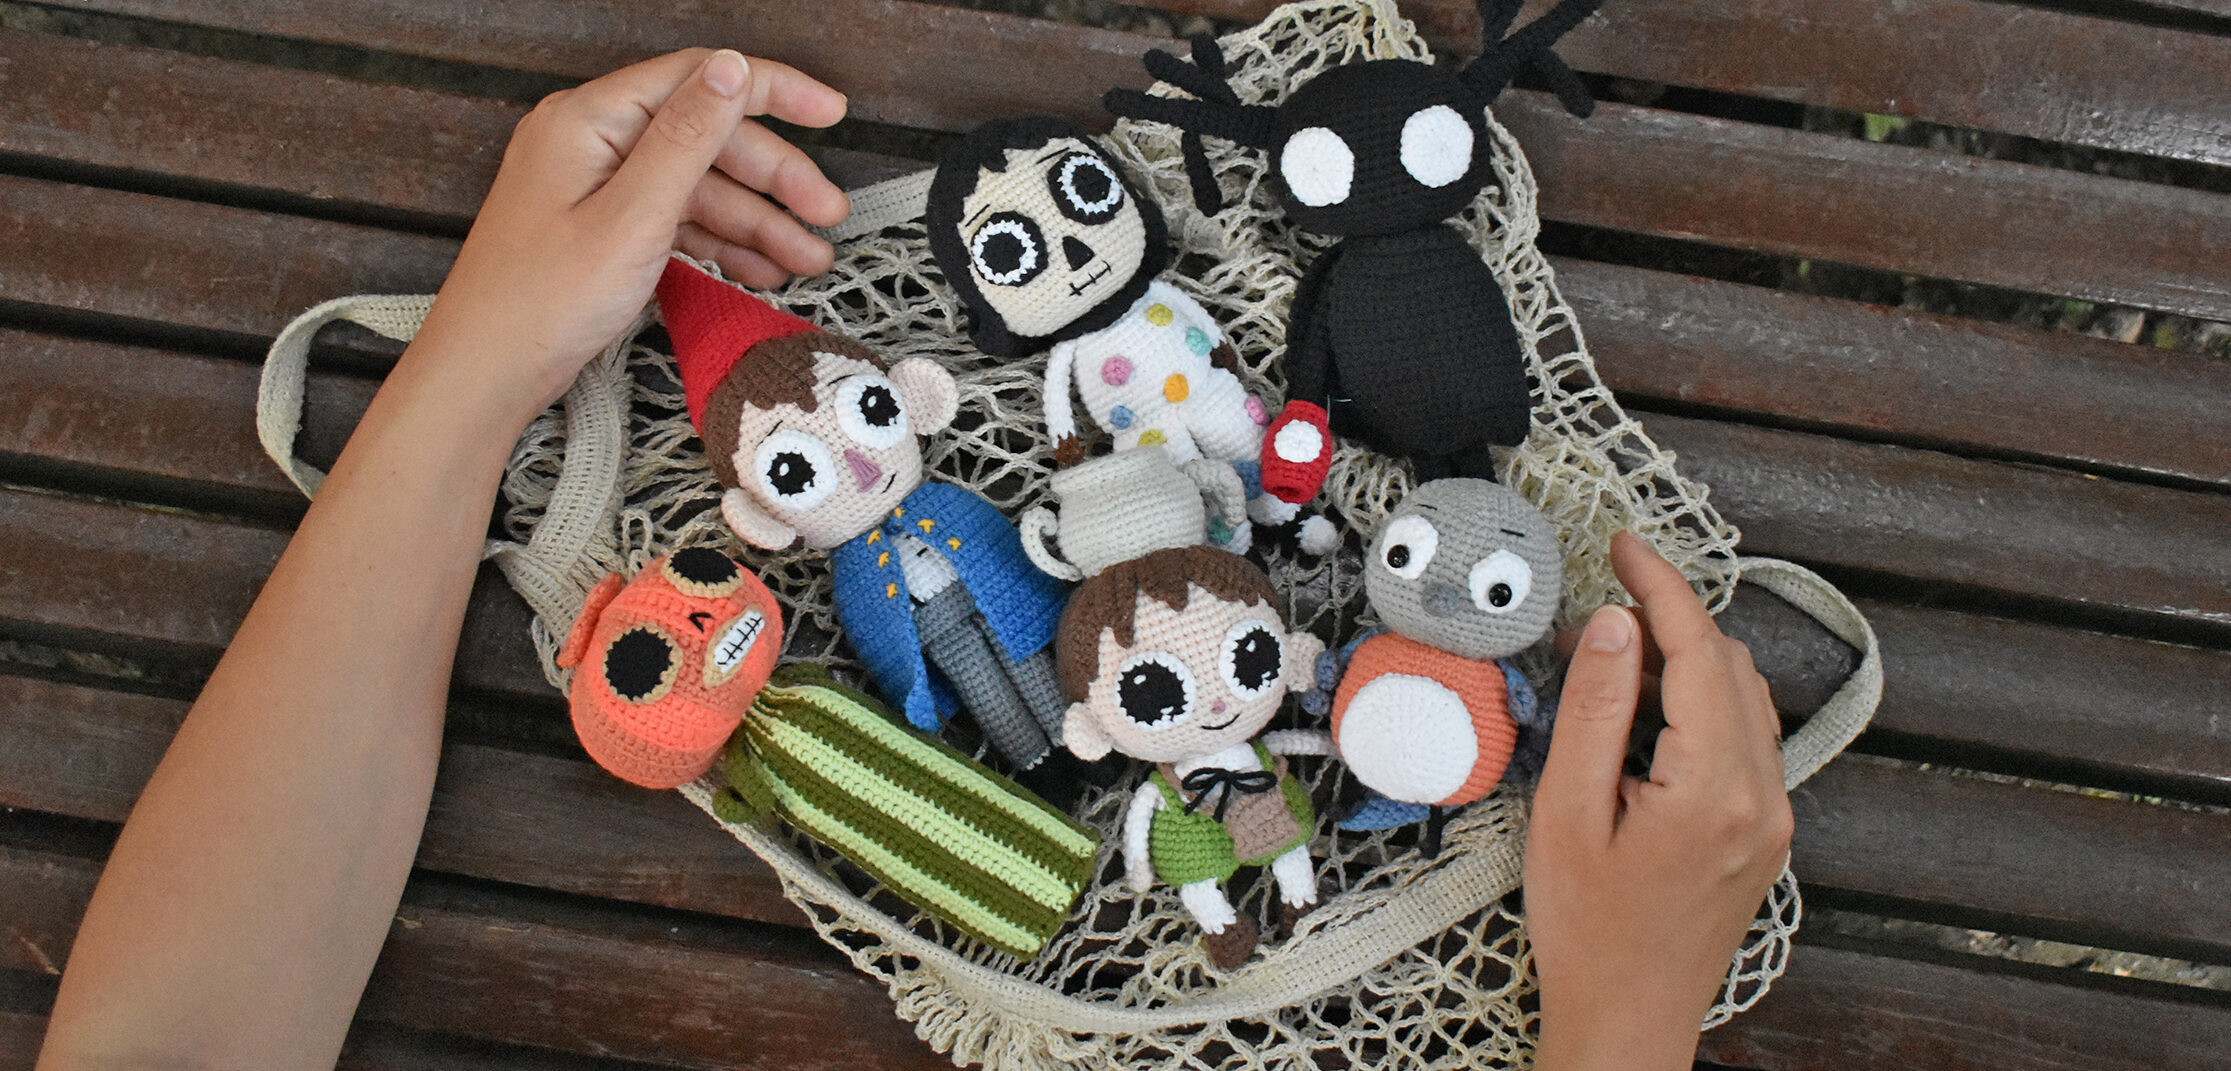 Over the Garden Wall Plush Toys Wirt, Greg, Beatrice 